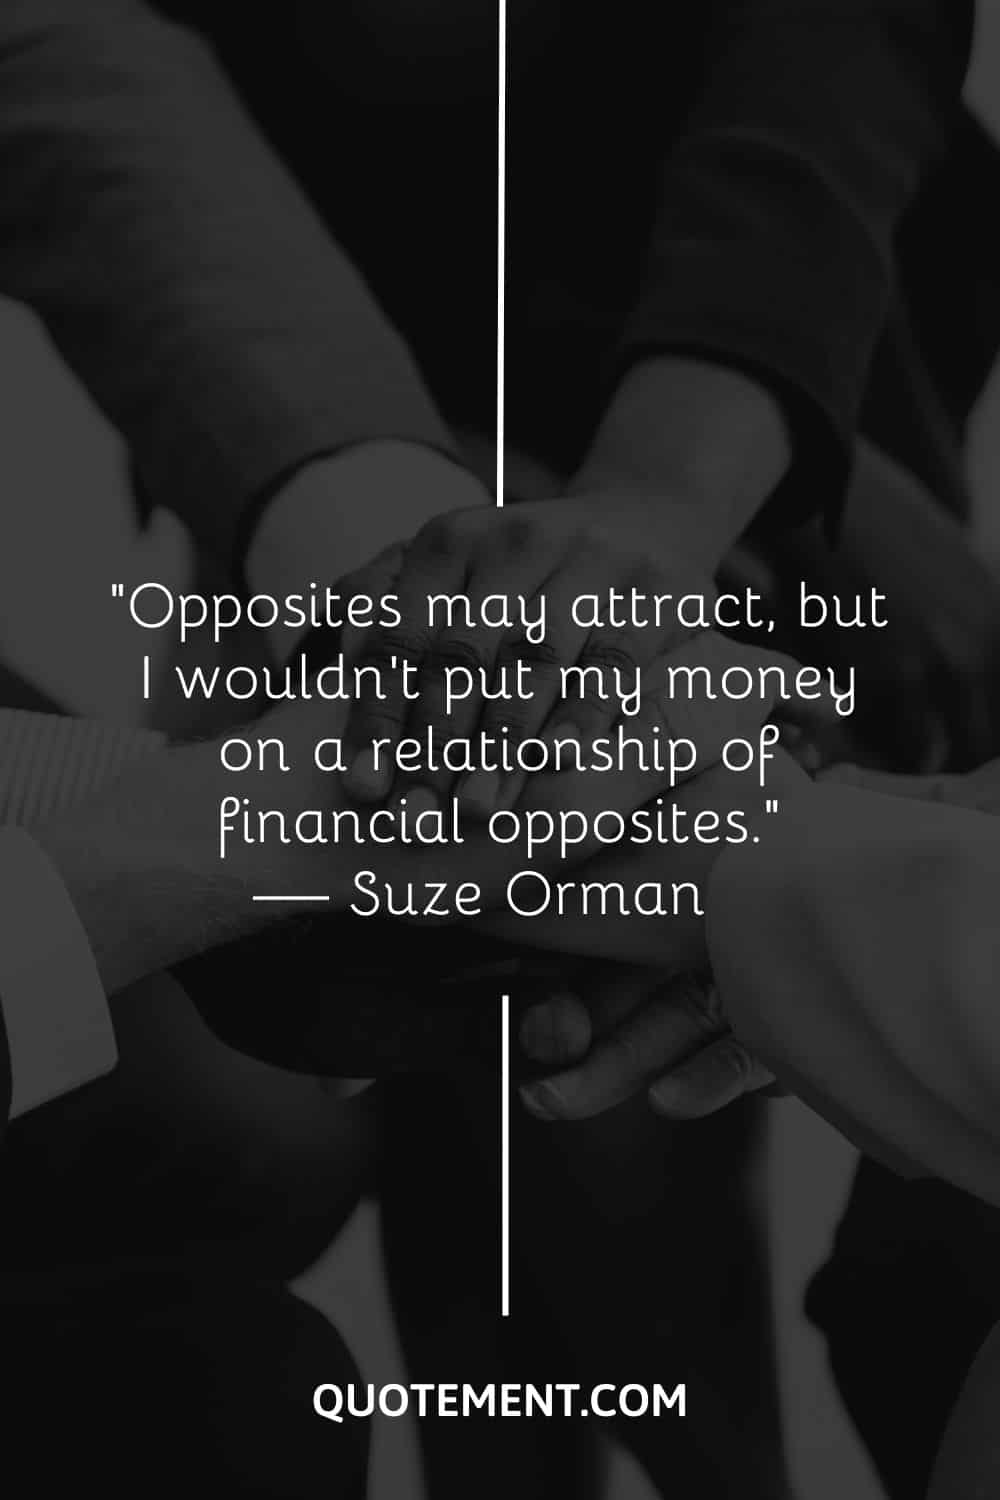 Opposites may attract, but I wouldn’t put my money on a relationship of financial opposites